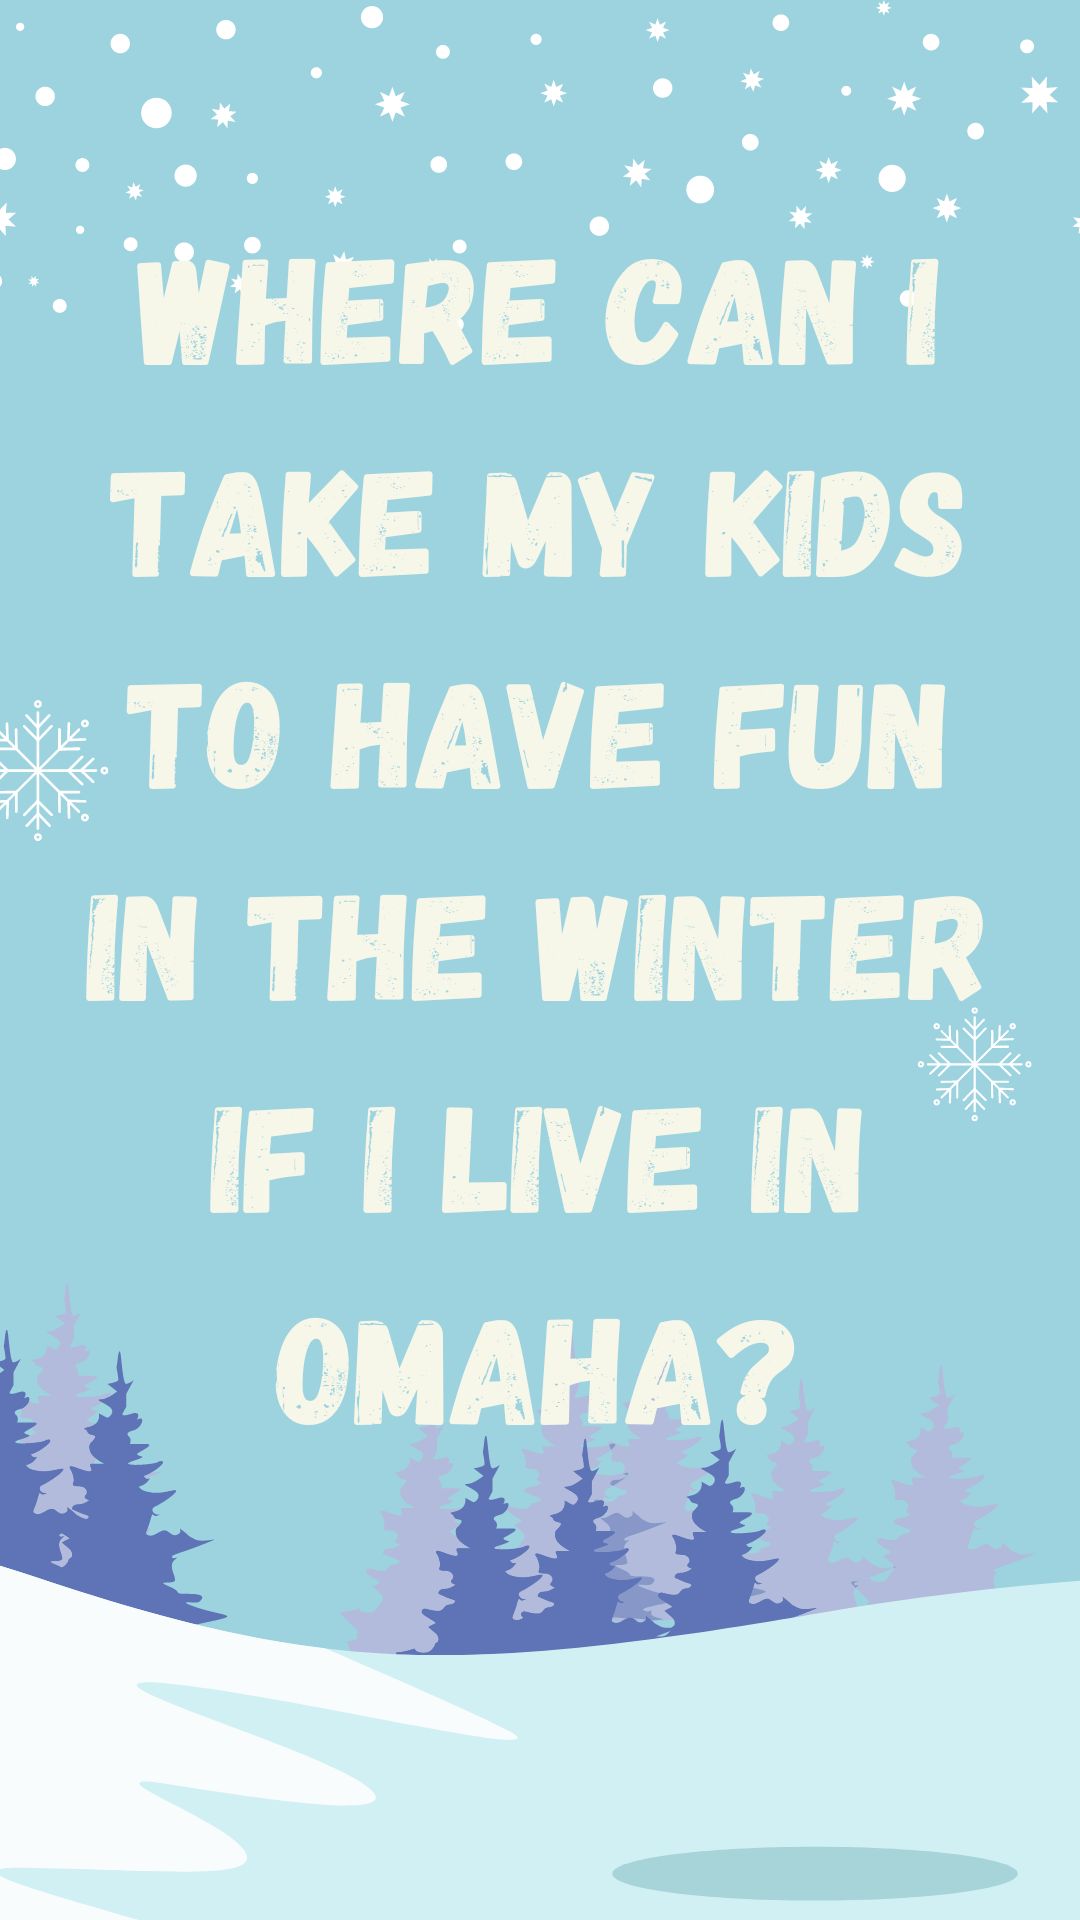 Where Can I Take My Kids to Have Fun in the Winter if I Live in Omaha?